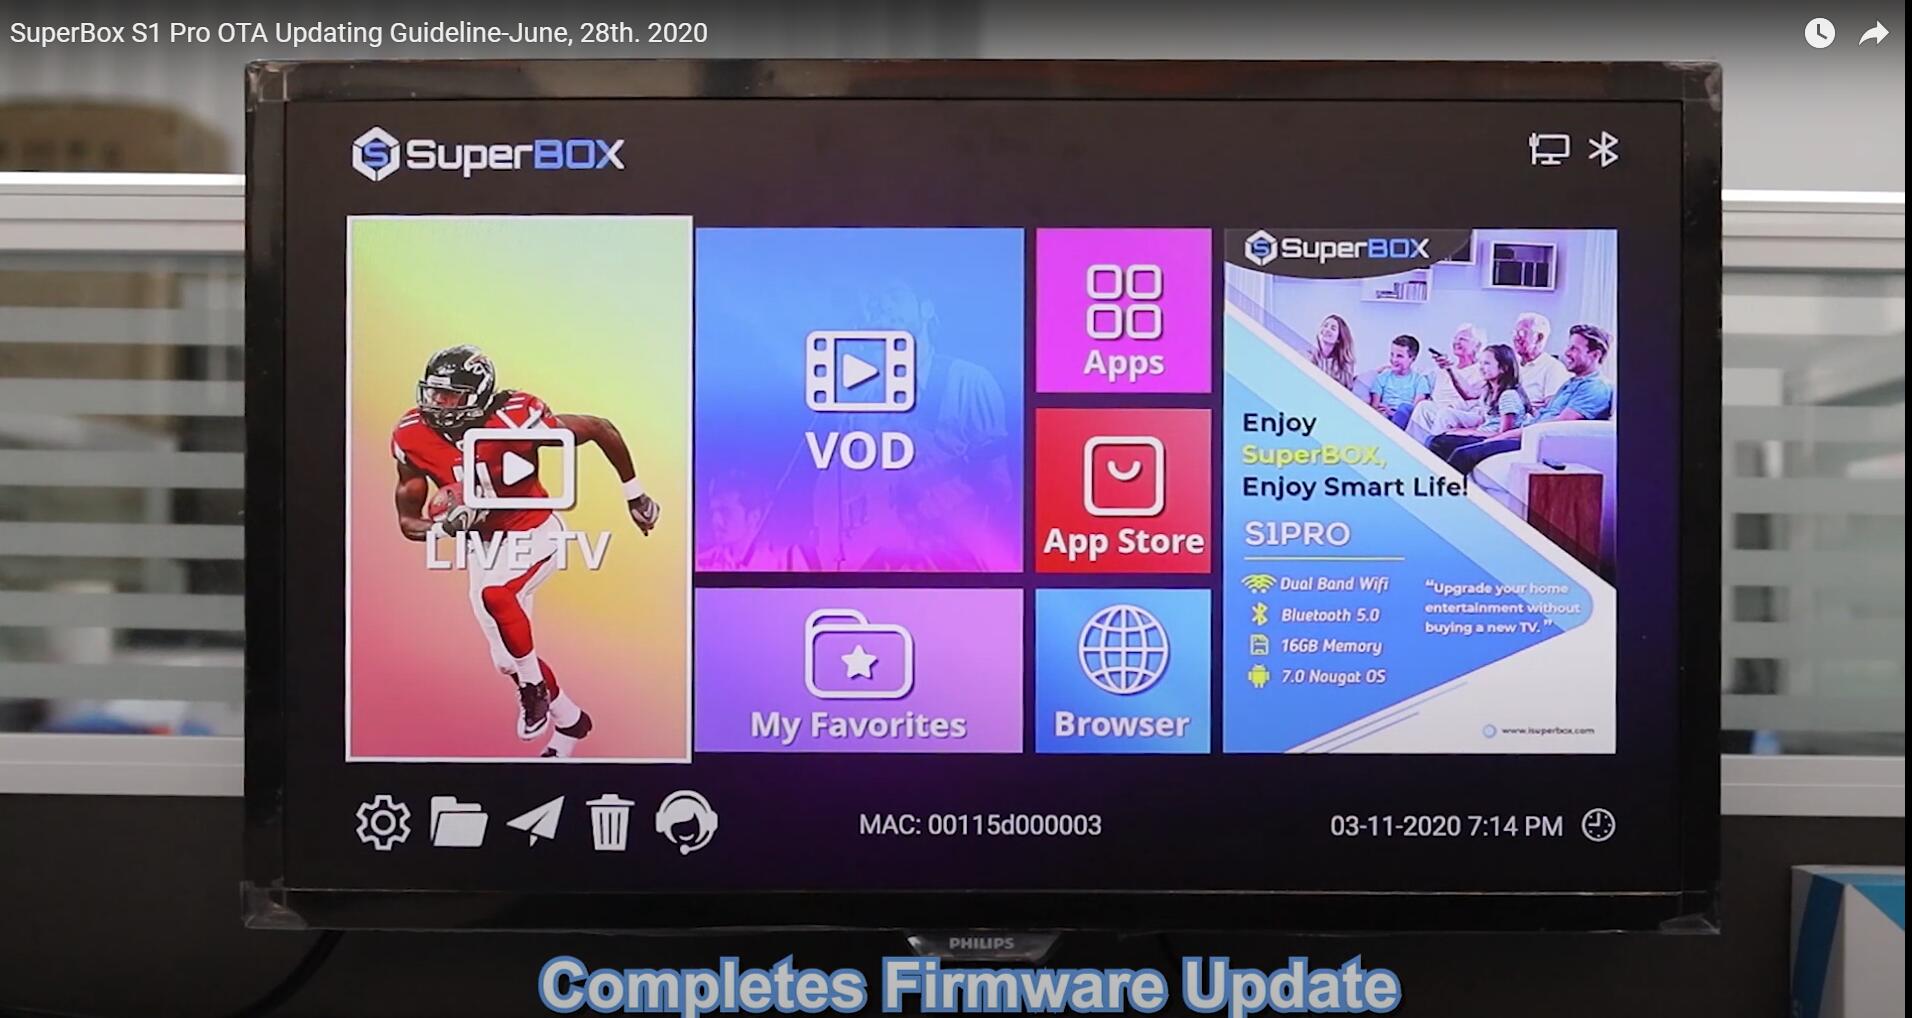 How to Update SuperBox S1 Pro?